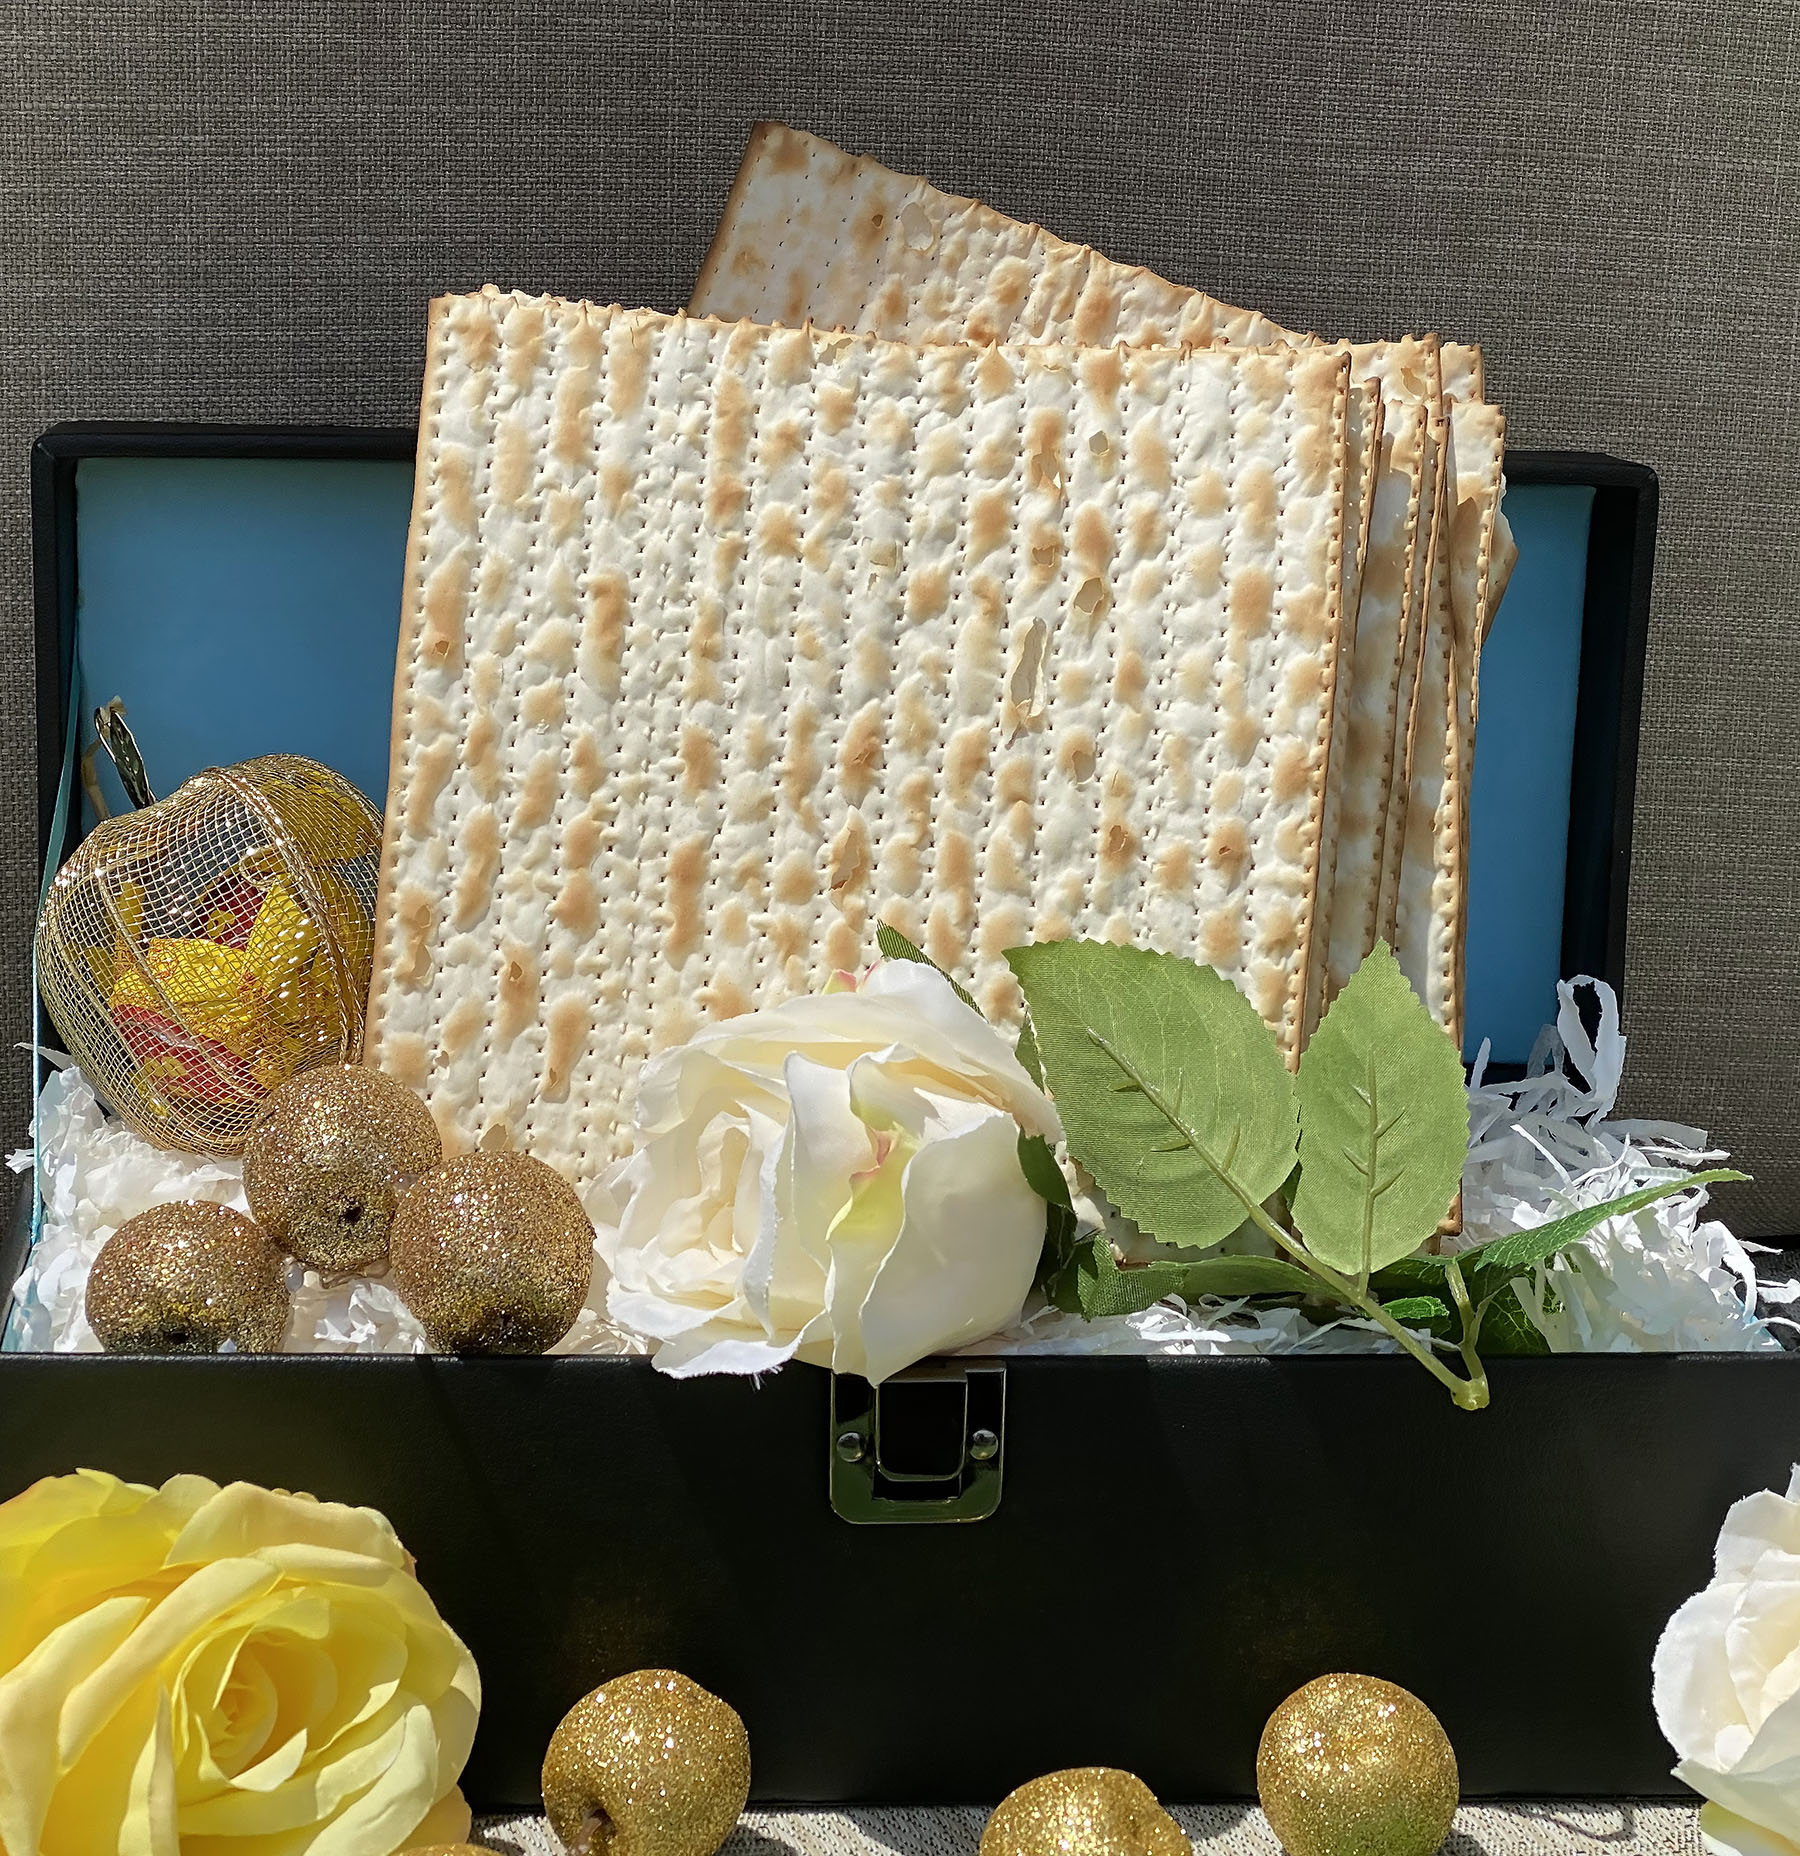 Pesach-Jewish easter. Feast in Passover. Matzah in gift leather chest with souvenir apples and roses